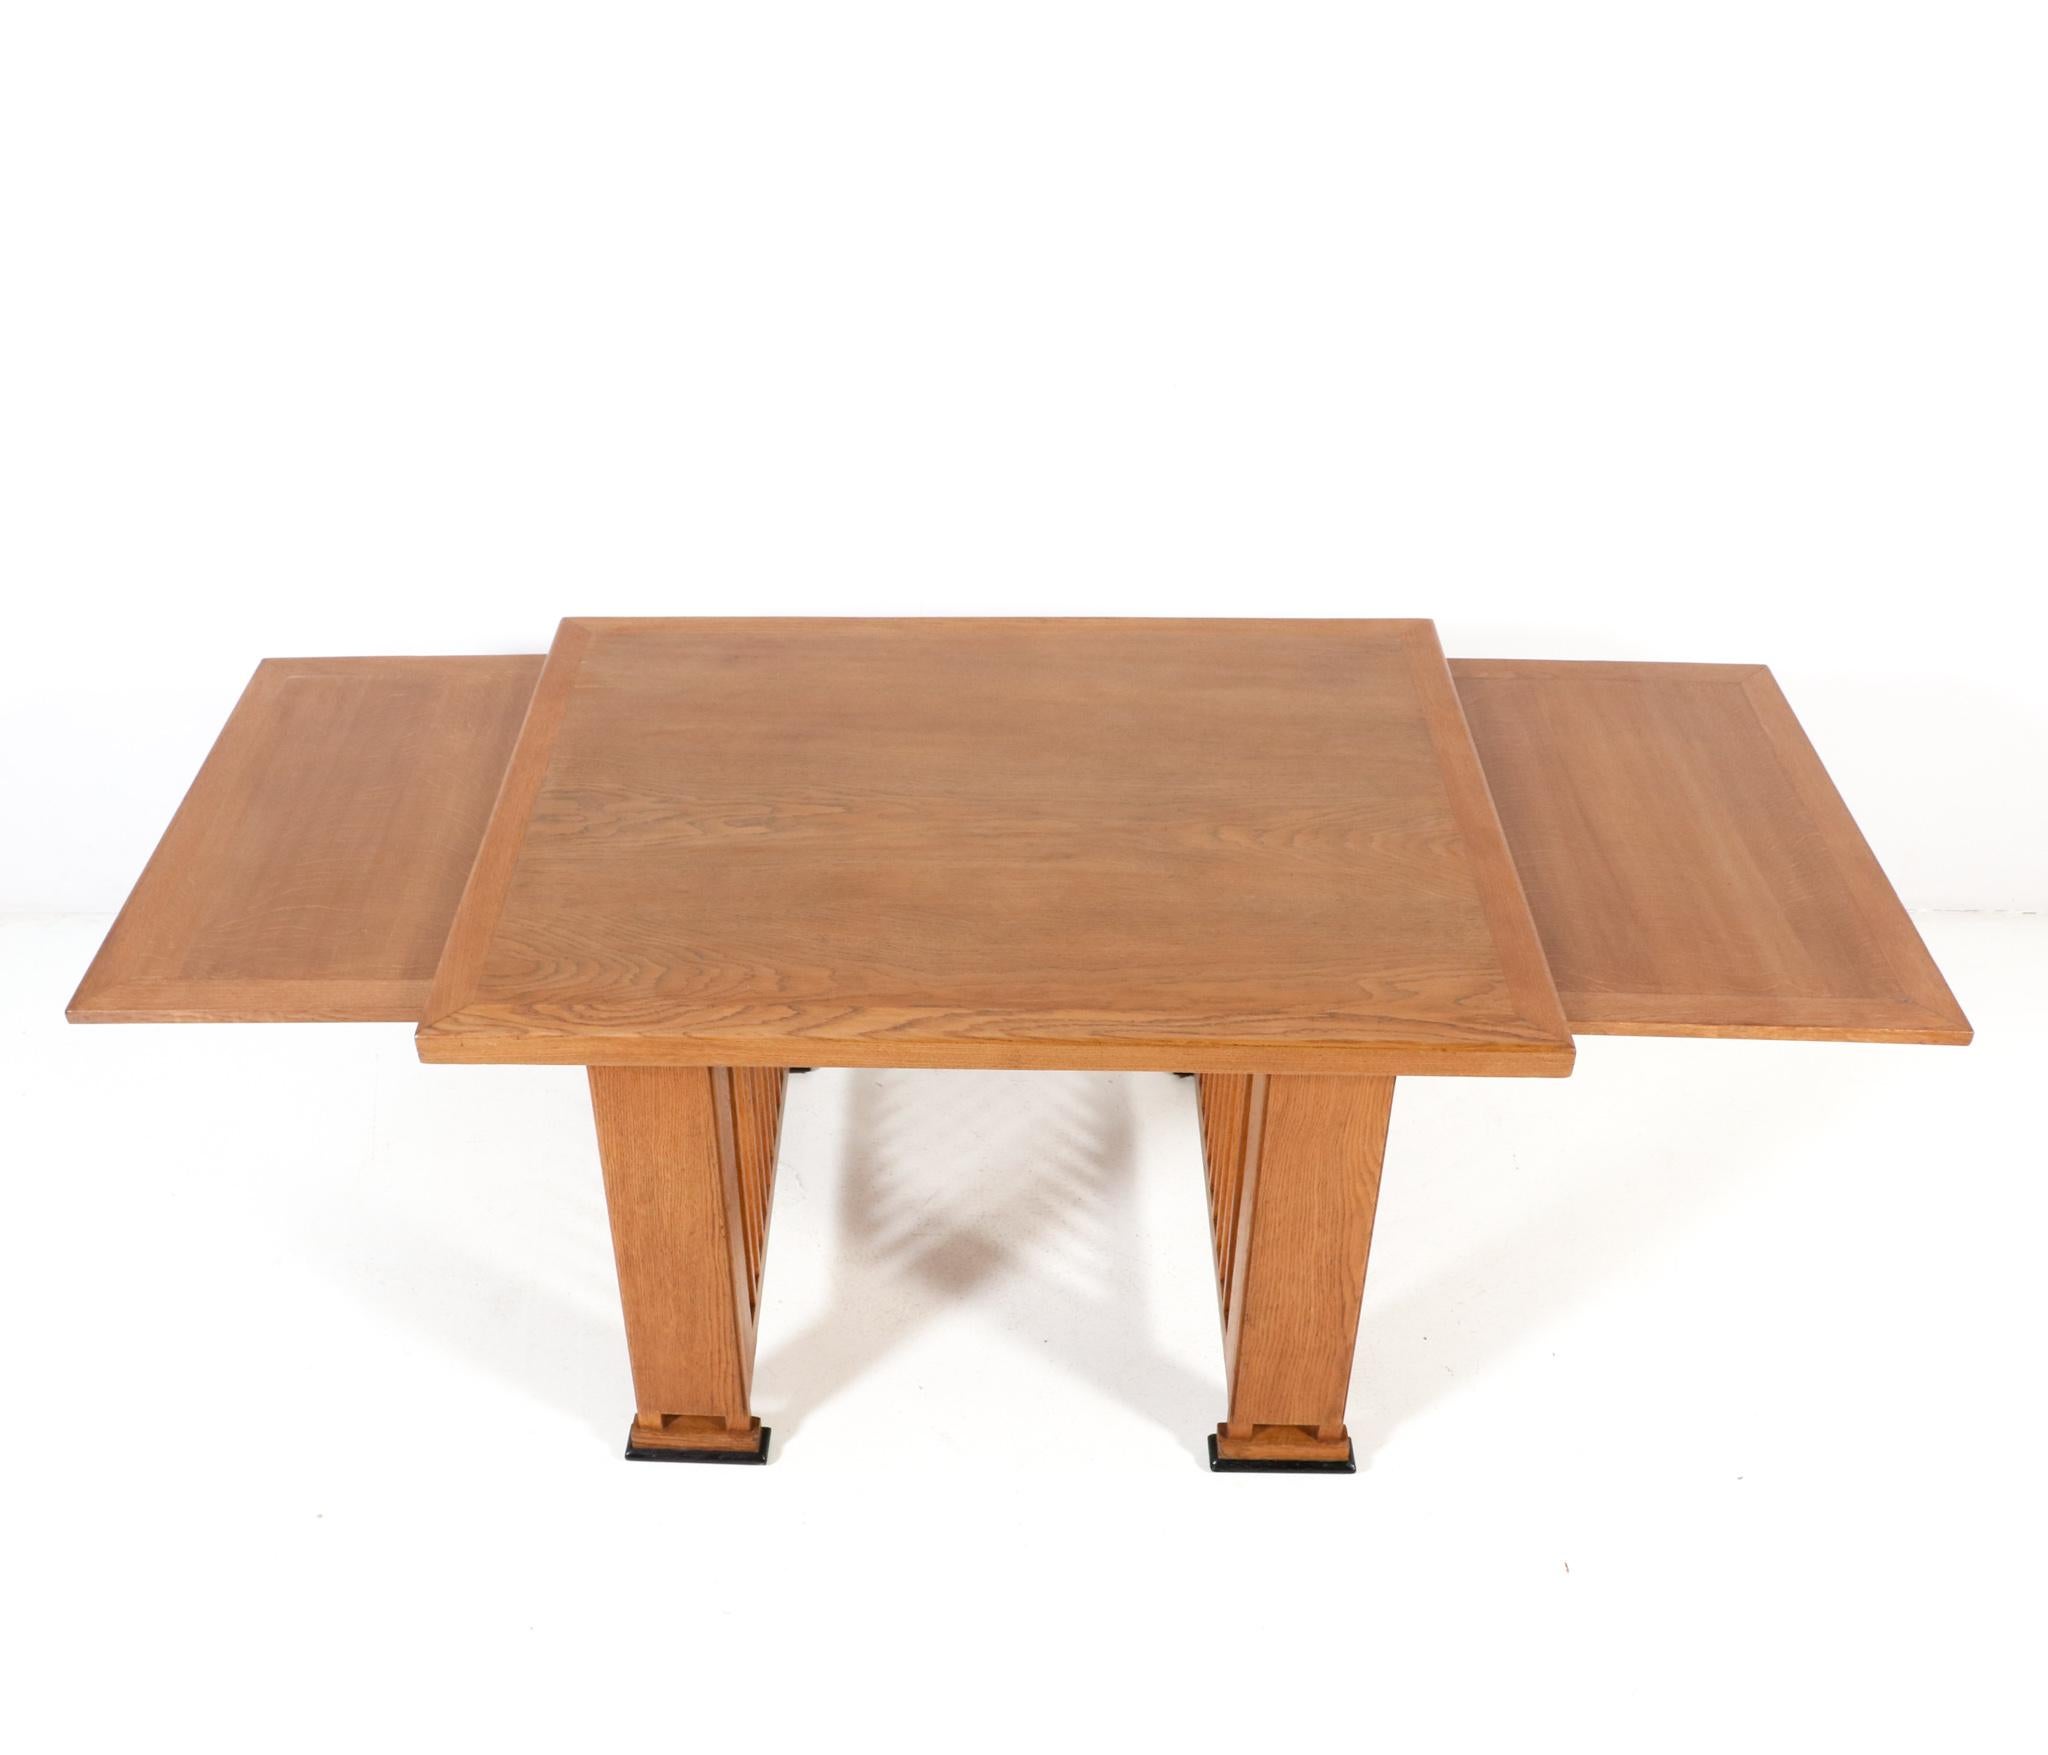 Oak Art Deco Modernist Writing Table or Dining Table by Architect Caspers, 1920s For Sale 7